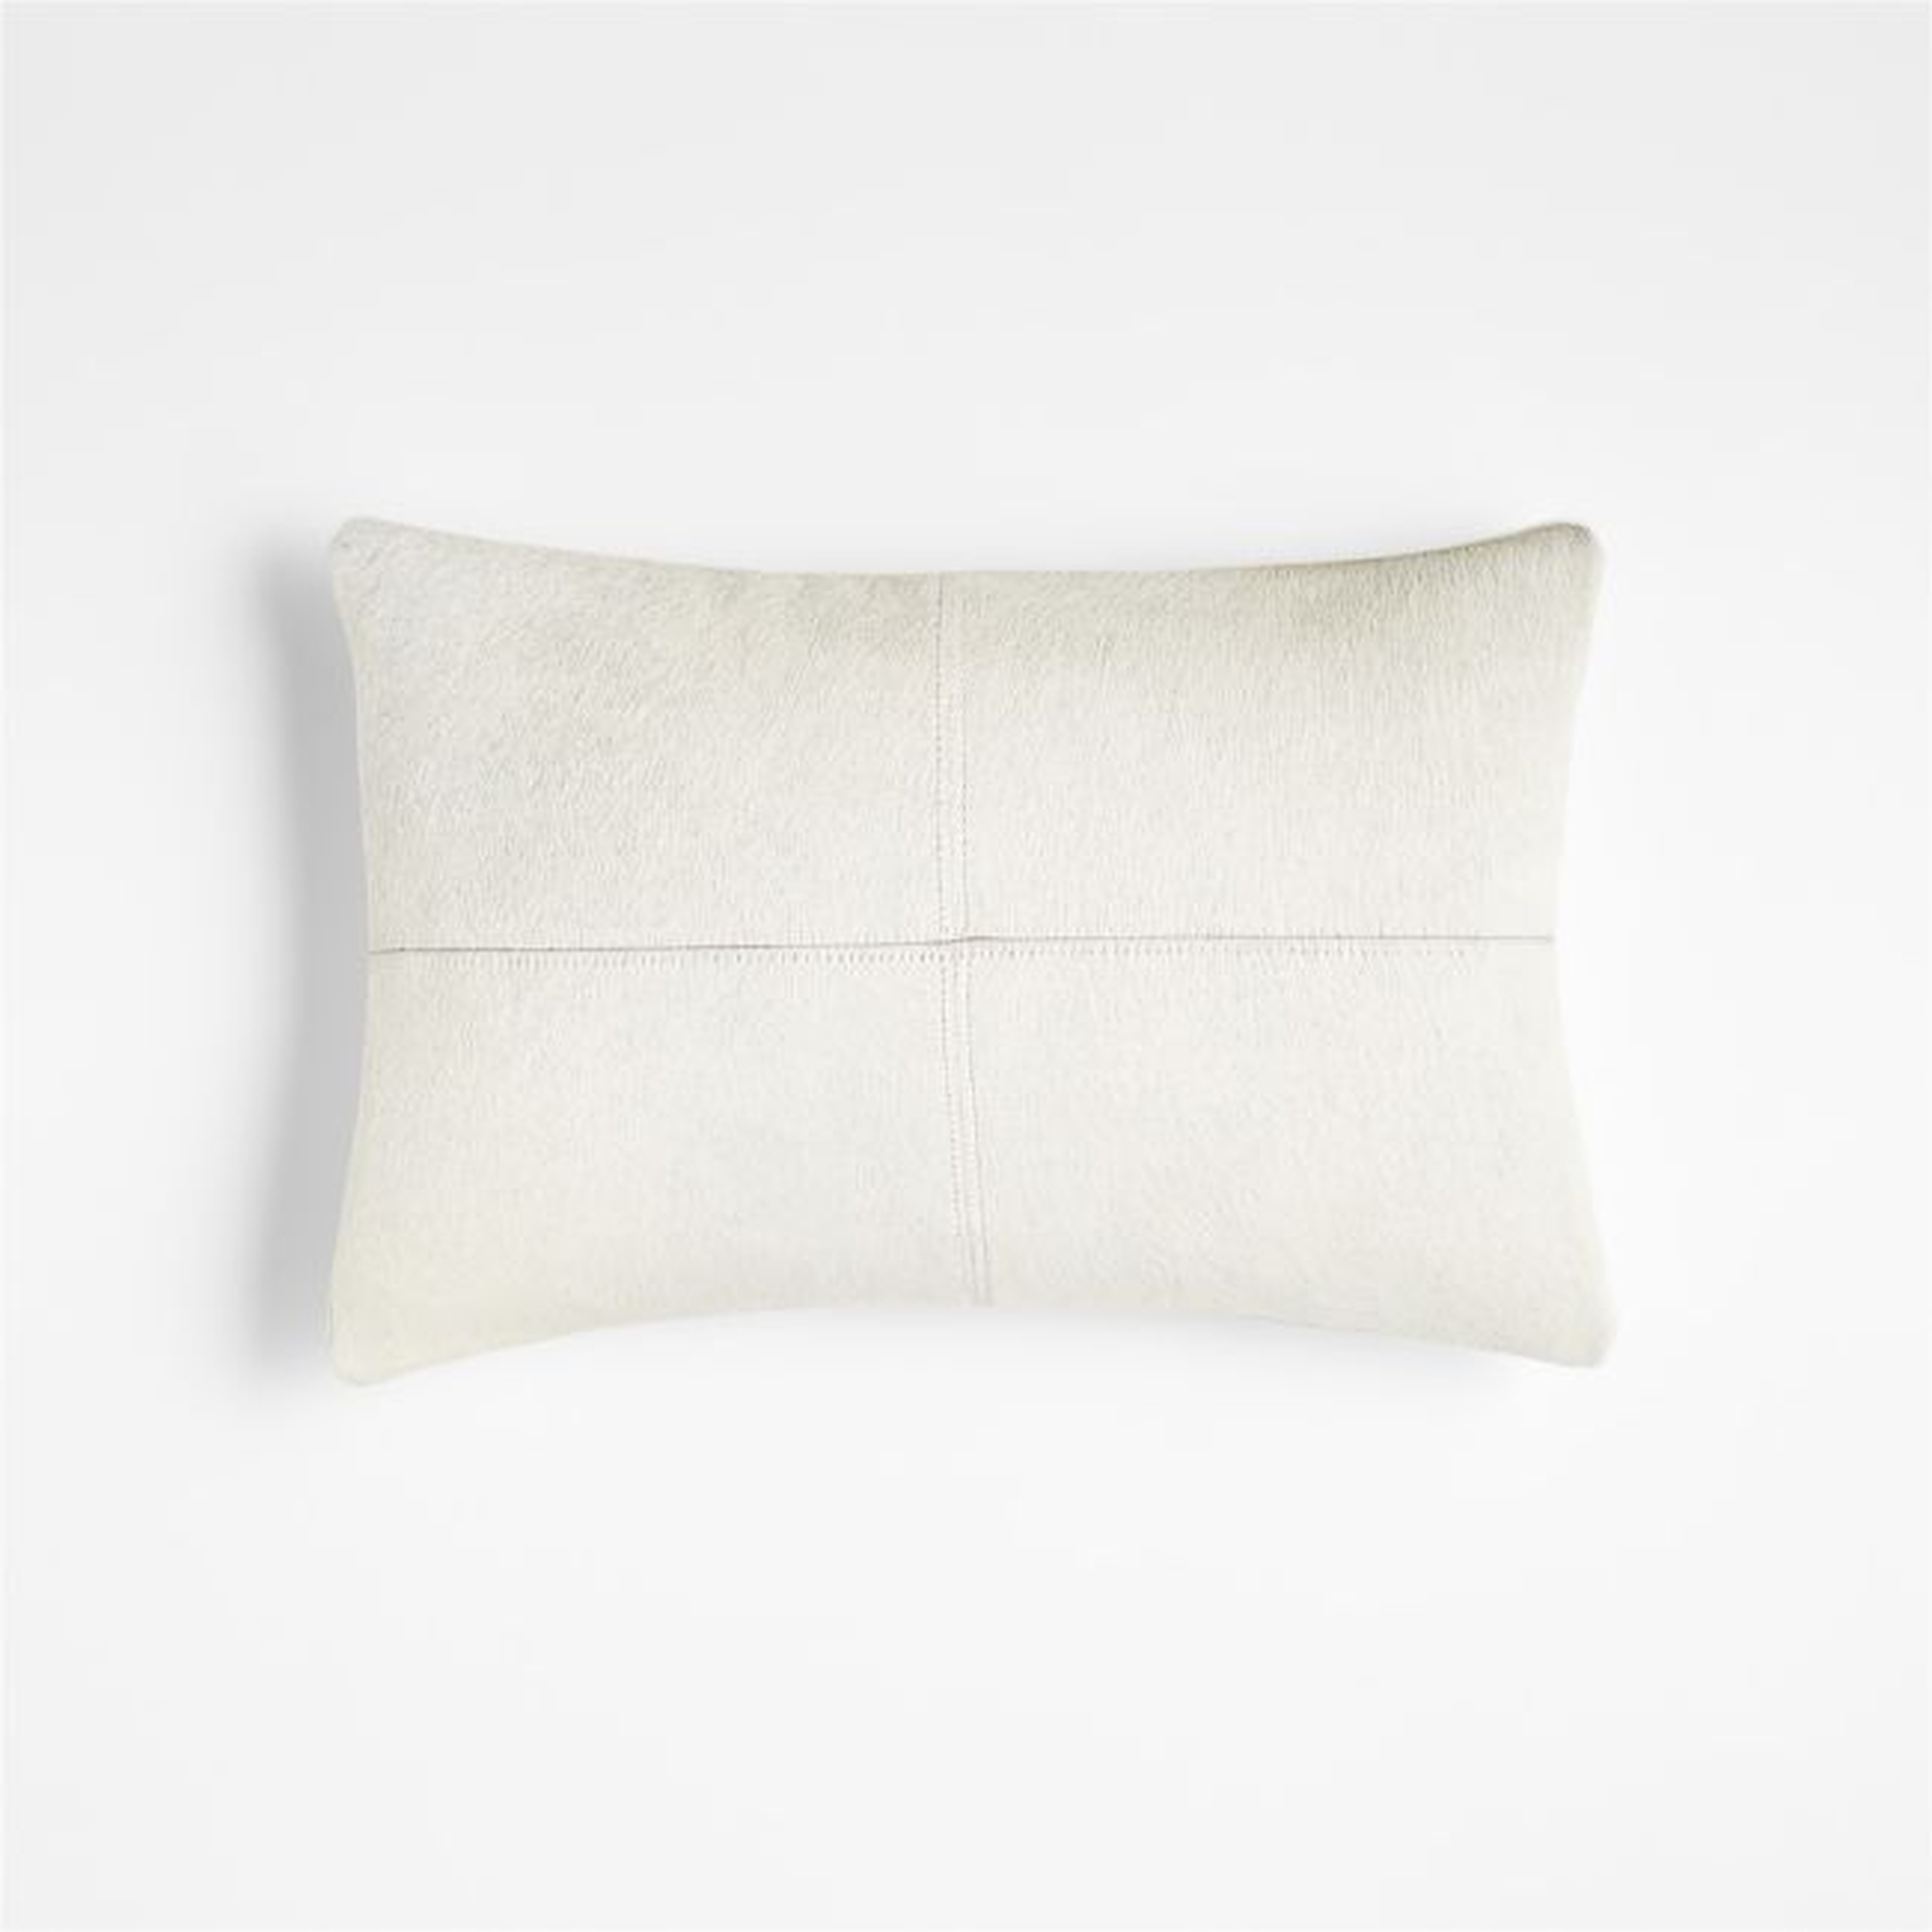 Valona 18"x12" White Cowhide Throw Pillow Cover - Crate and Barrel